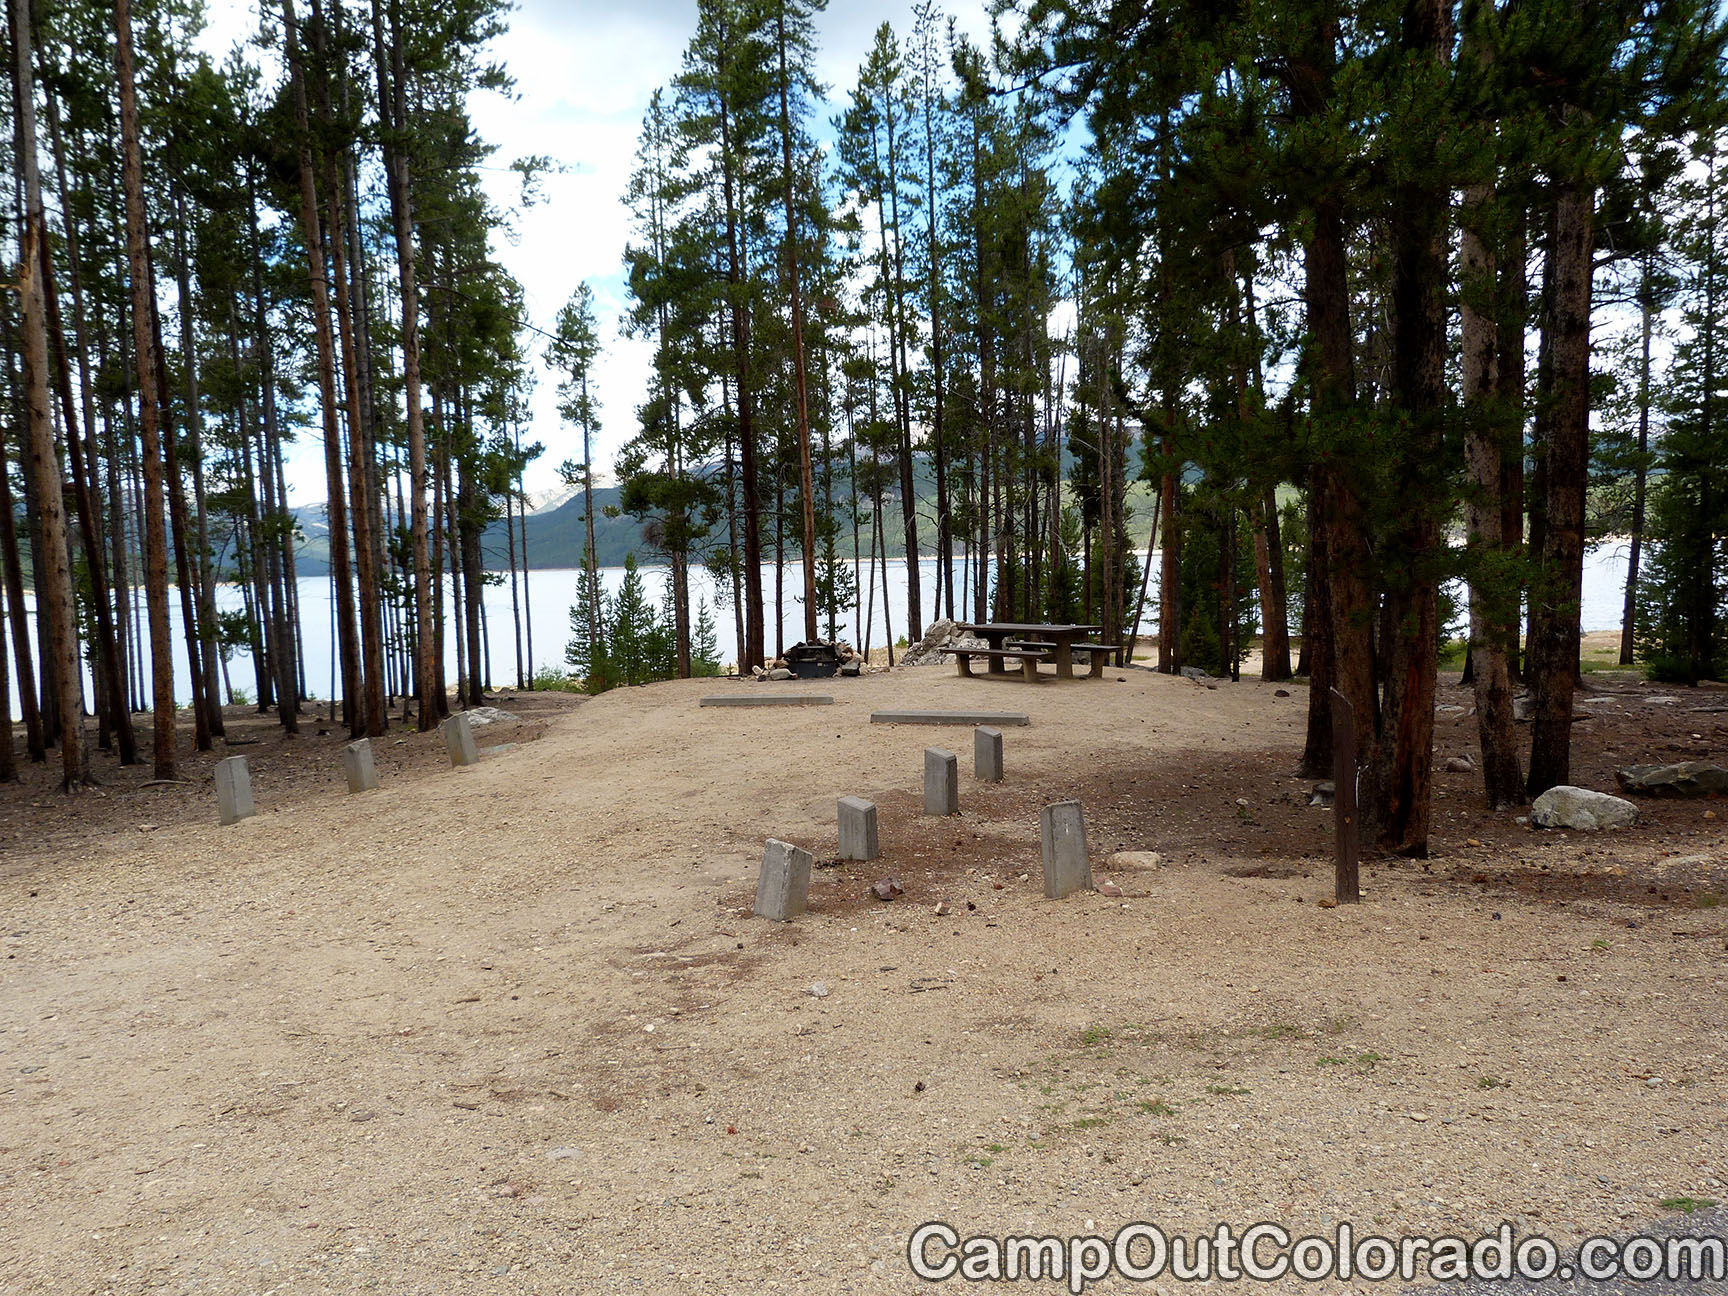 Camp-out-colorado-molly-brown-turquoise-lake-camping